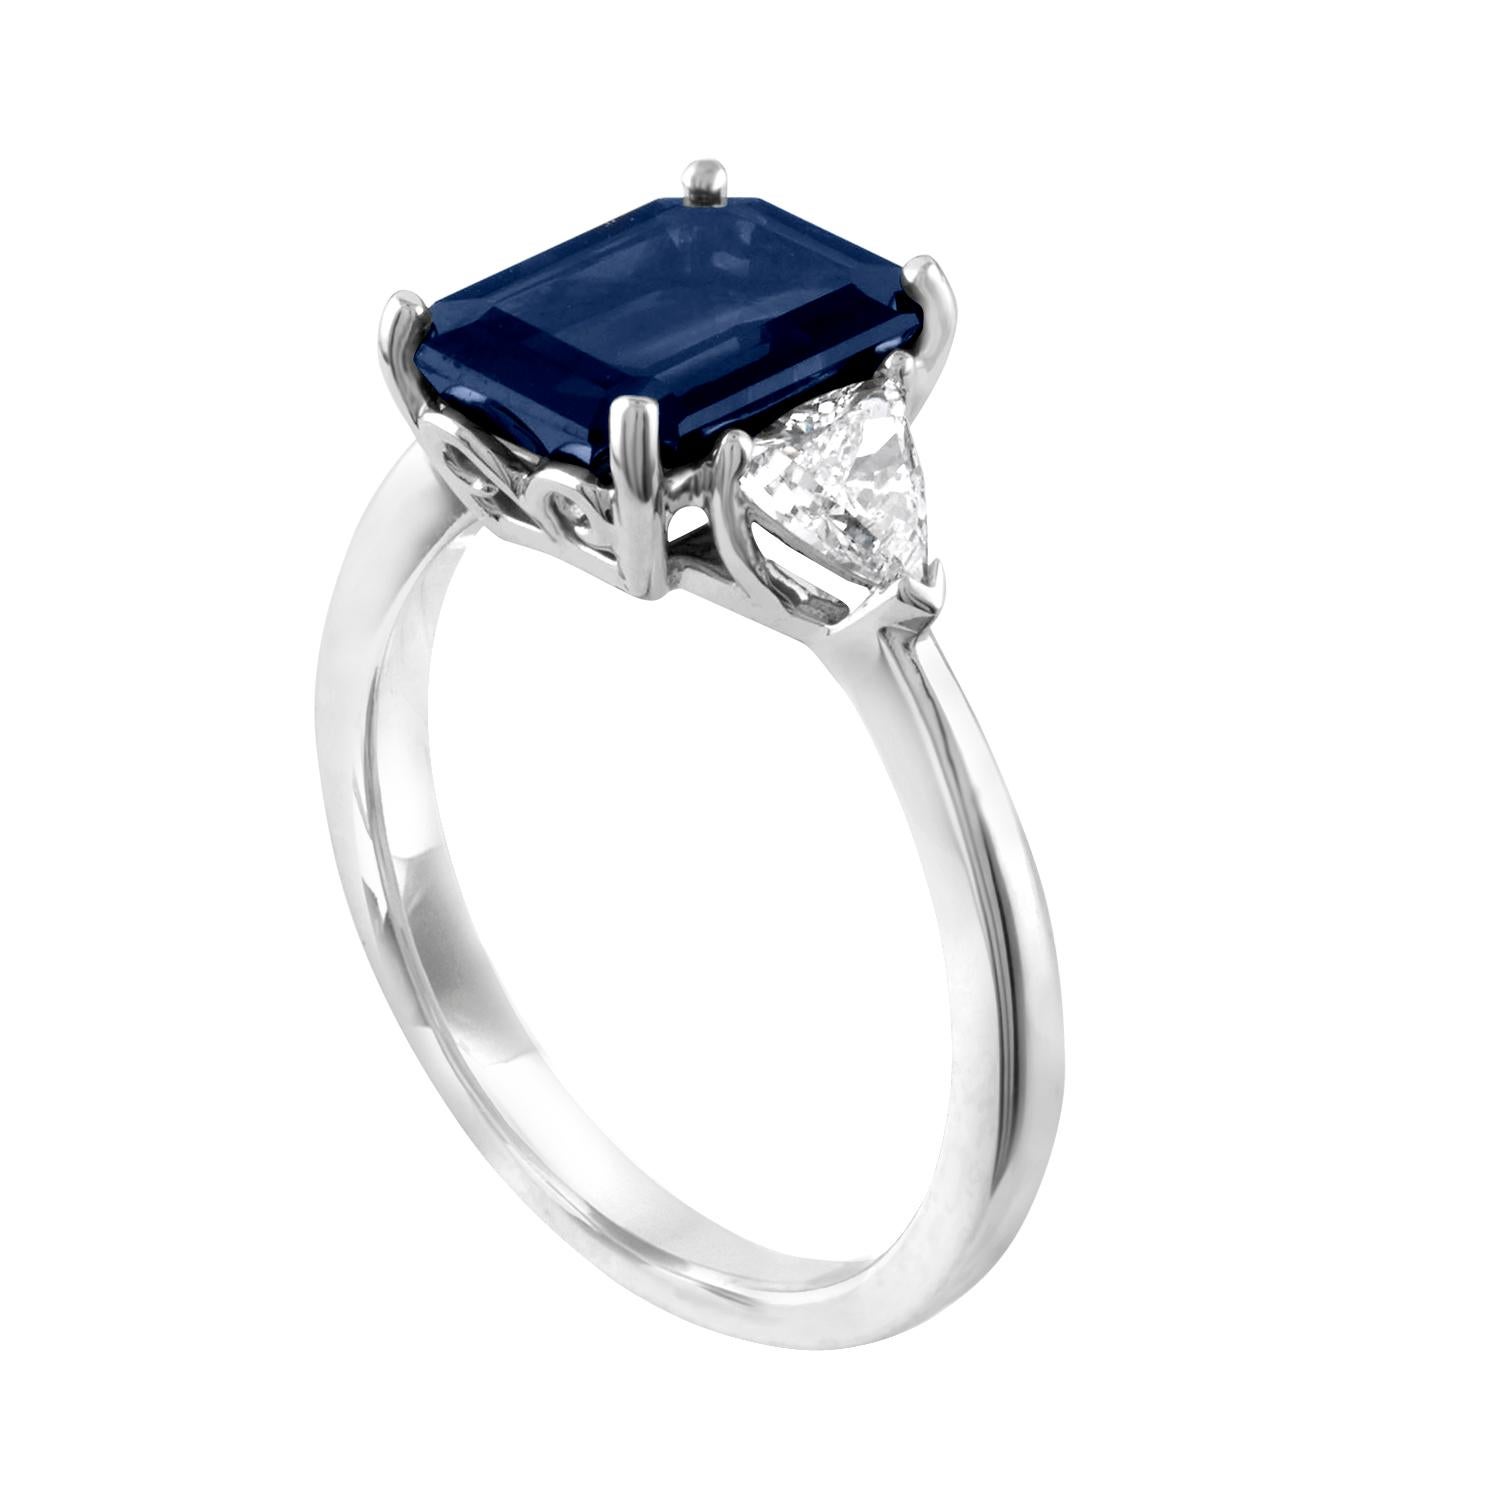 Stunning Three Stone Sapphire Ring
The ring is 18K White Gold
The Center stone is 3.33 Carats Dark Blue Sapphire
The Sapphire is GIA Certified Octagonal Step Cut Heated
There are 2 trillion Diamonds 0.52 Carats F VS
The ring is a size 6.75,